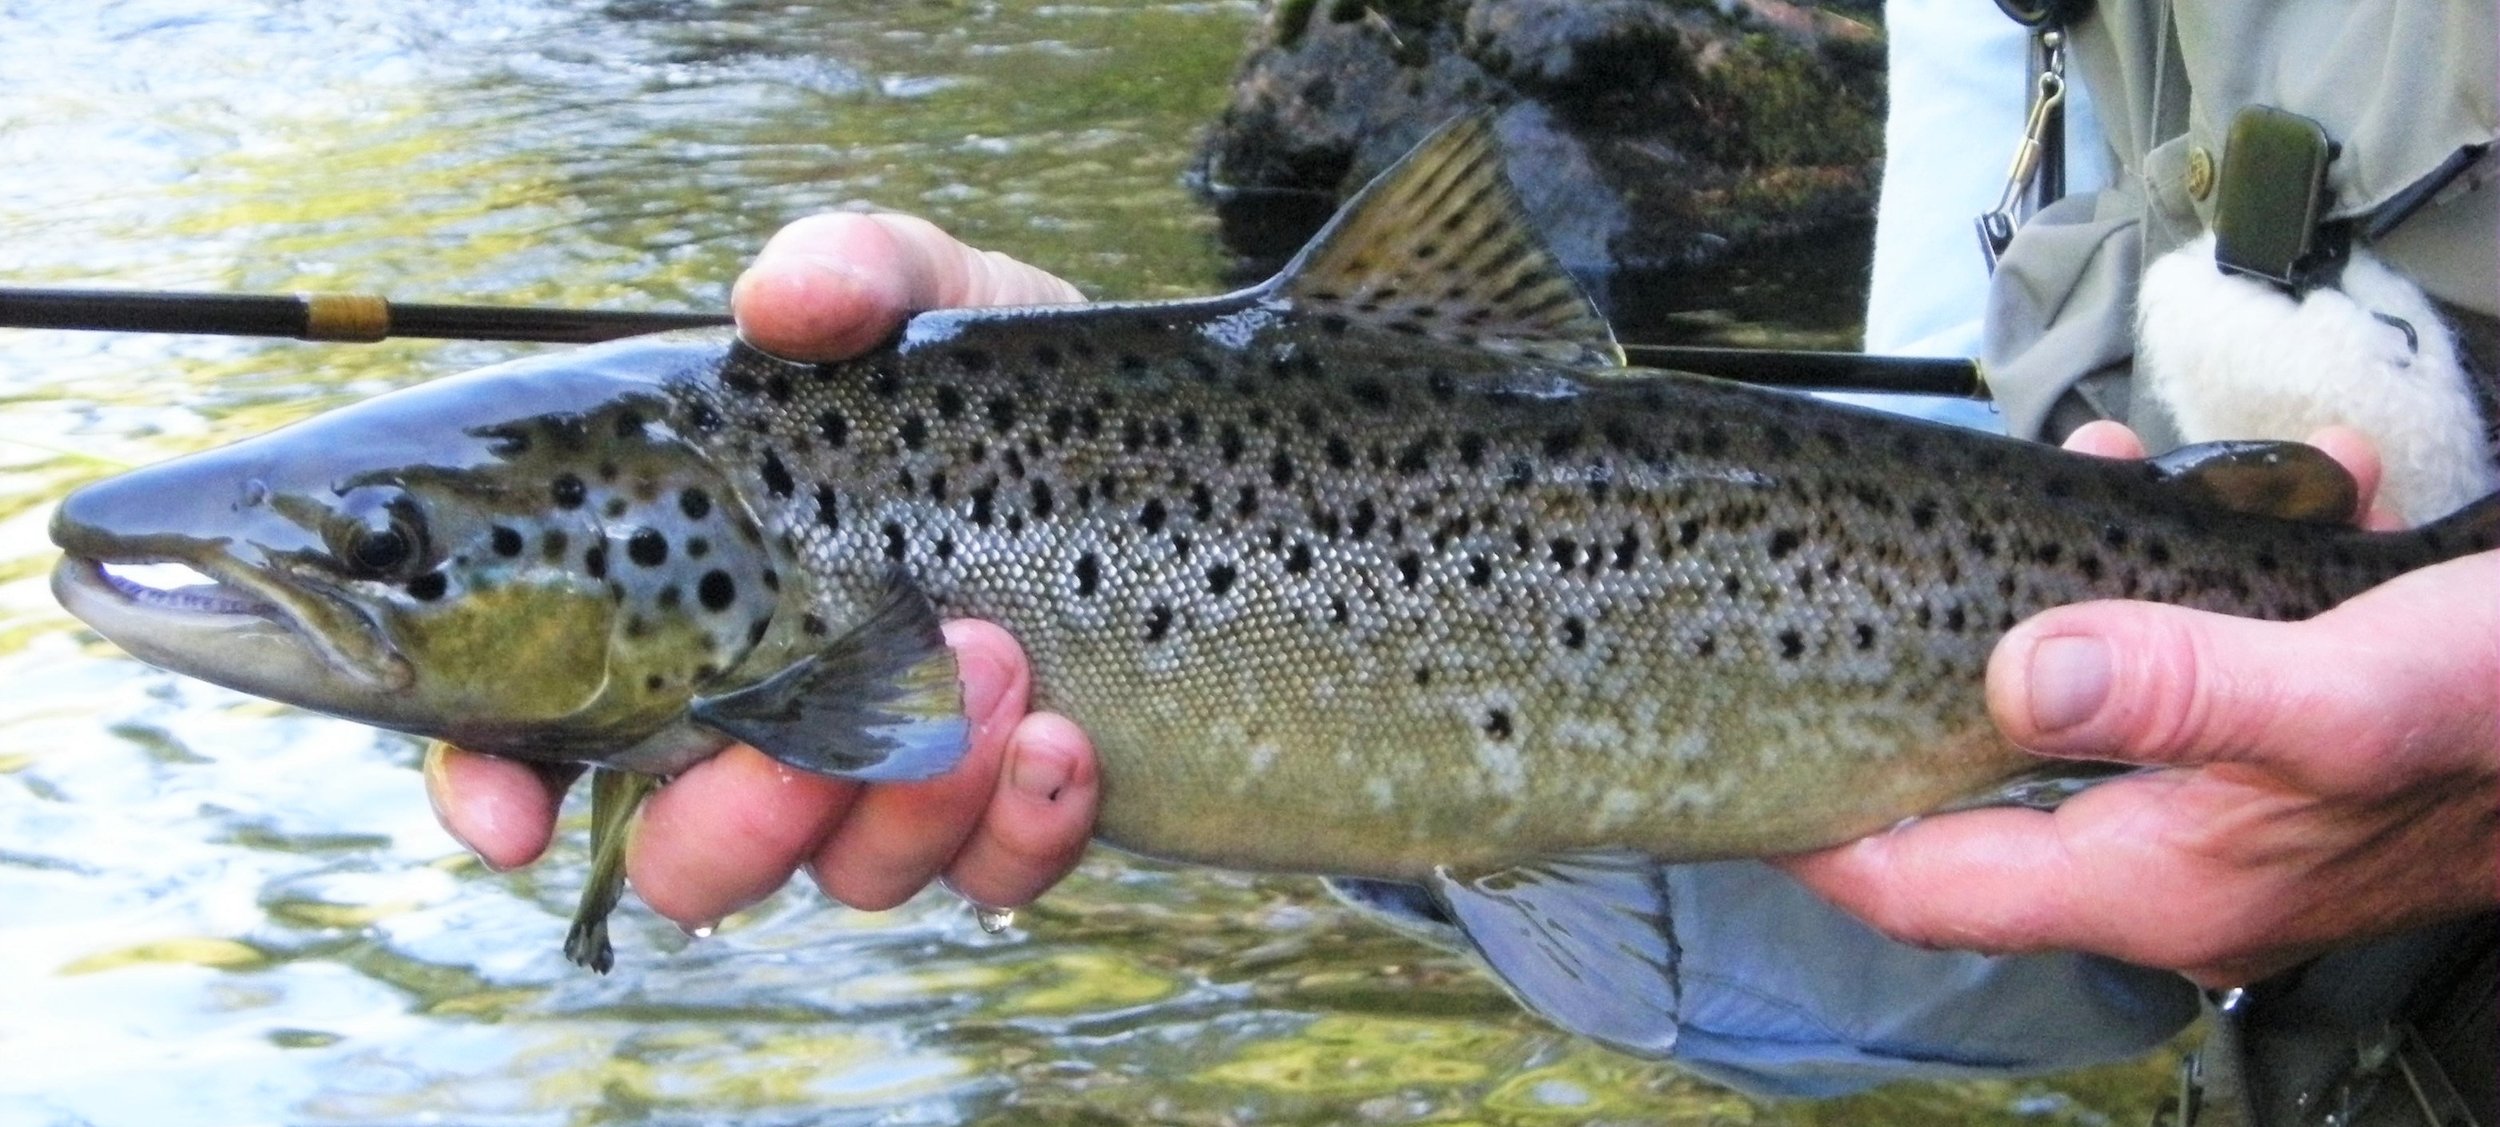 New Protections for Wild Brook Trout! - Maine Audubon